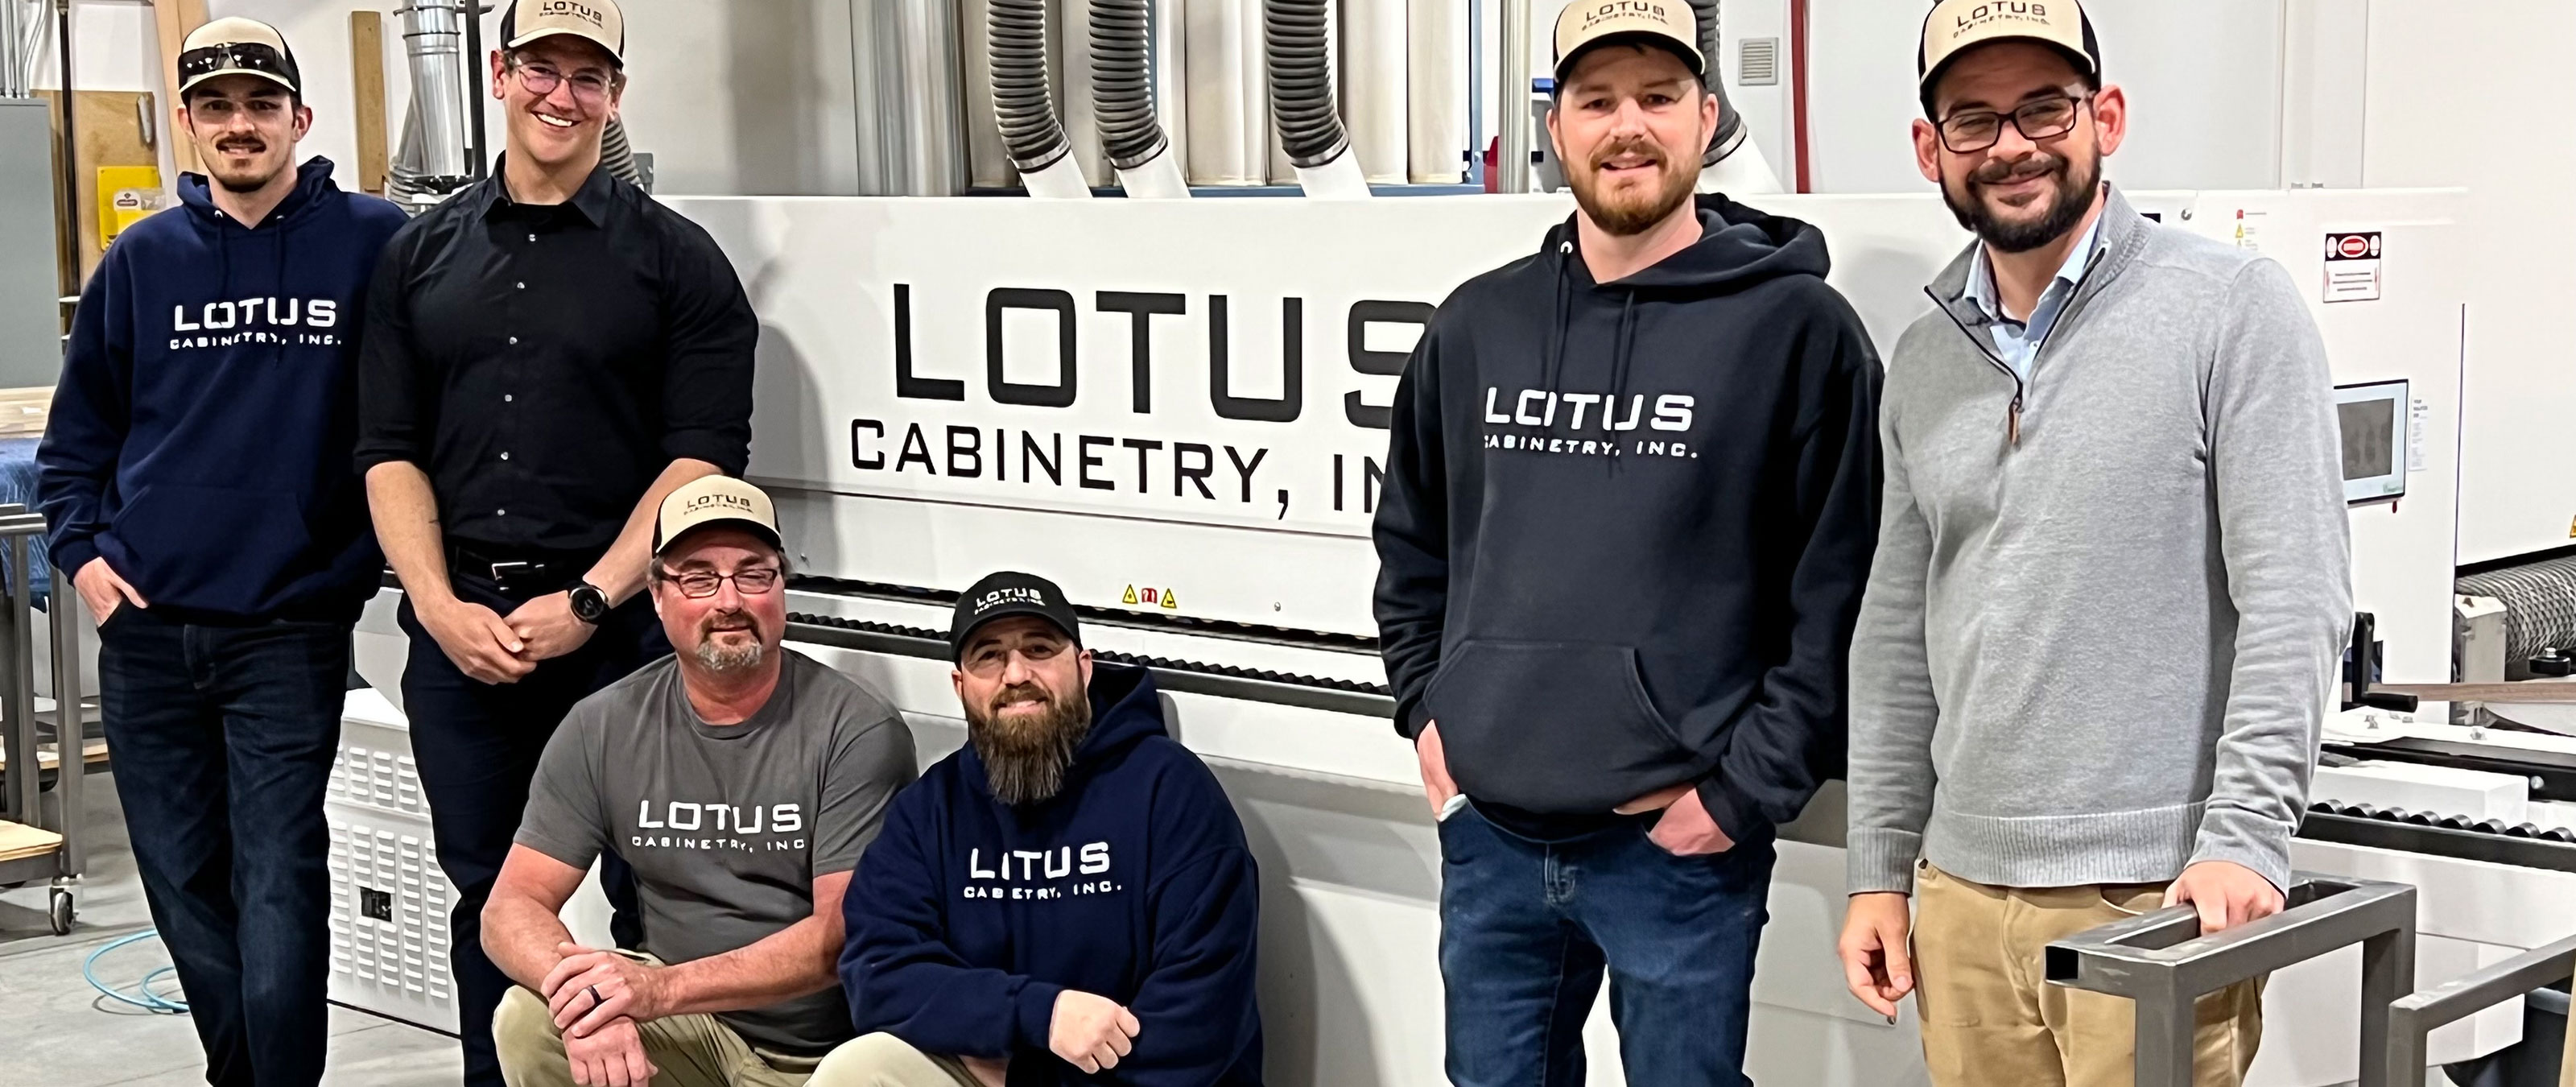 Members of the Lotus team and our consultants Martin Kintscher (on the right) and René Hanuscheck (second from left) in the production area. The family business will switch to a dowel construction and corpus press in the future.